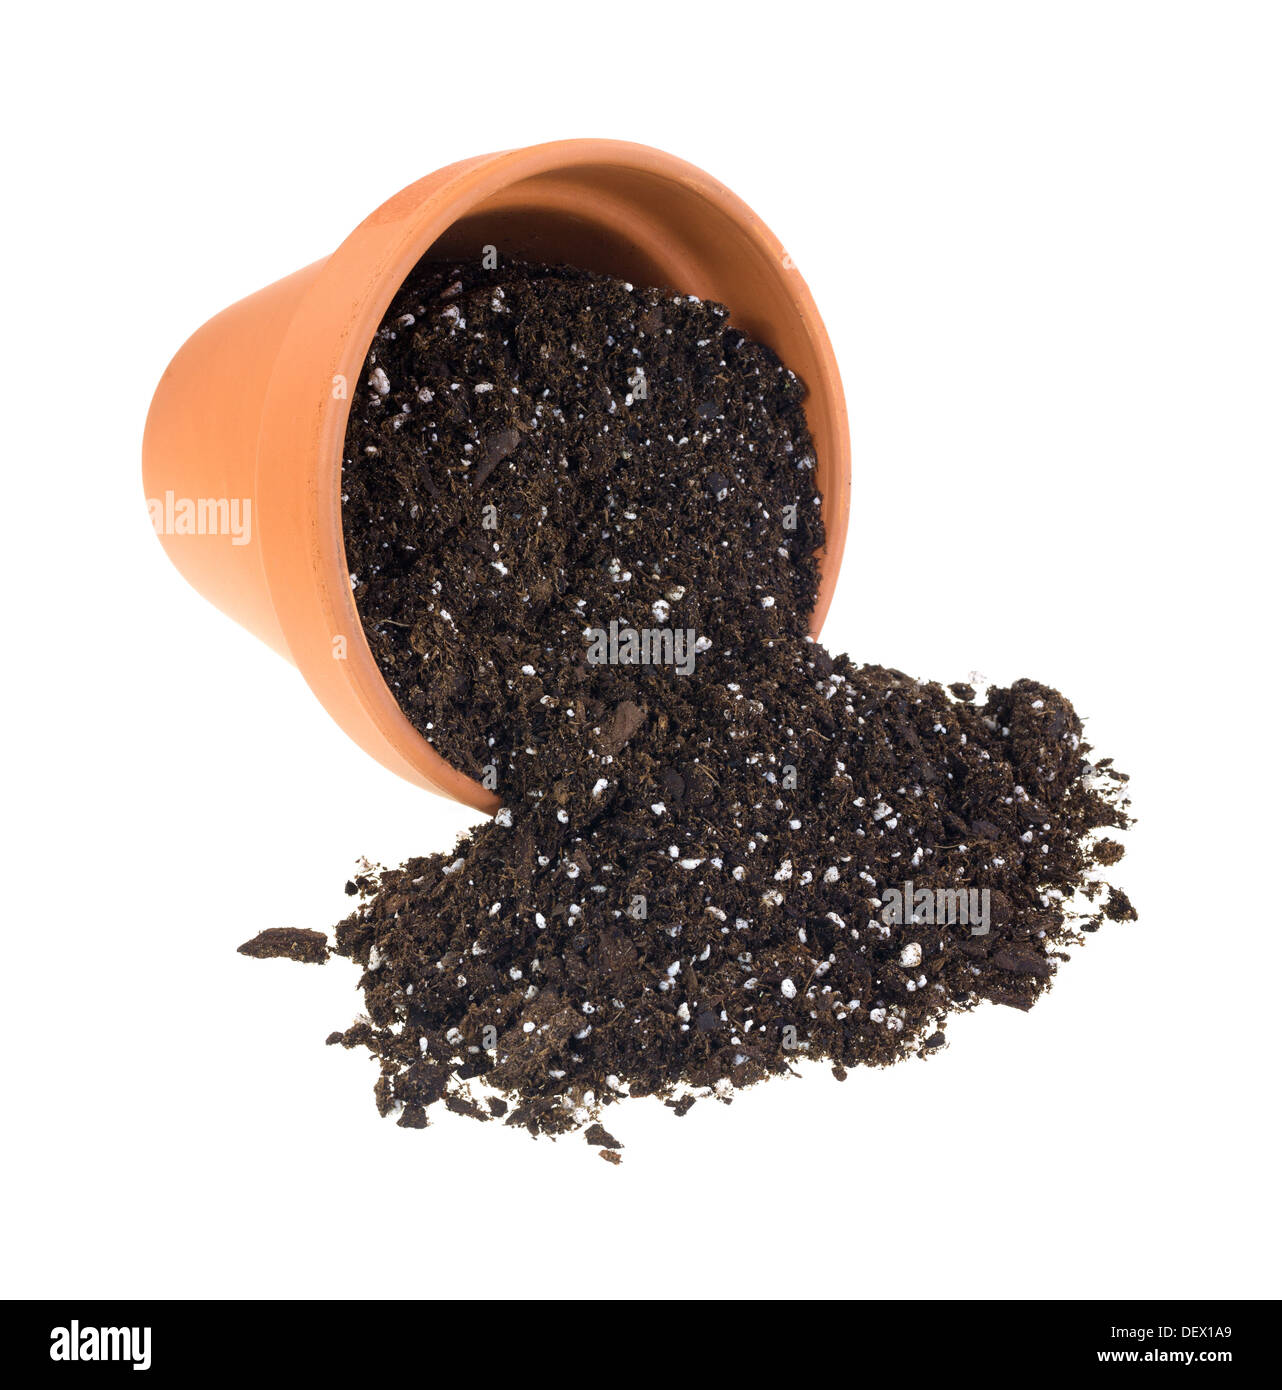 Organic potting soil spilling from a red clay plant pot onto a white background. Stock Photo